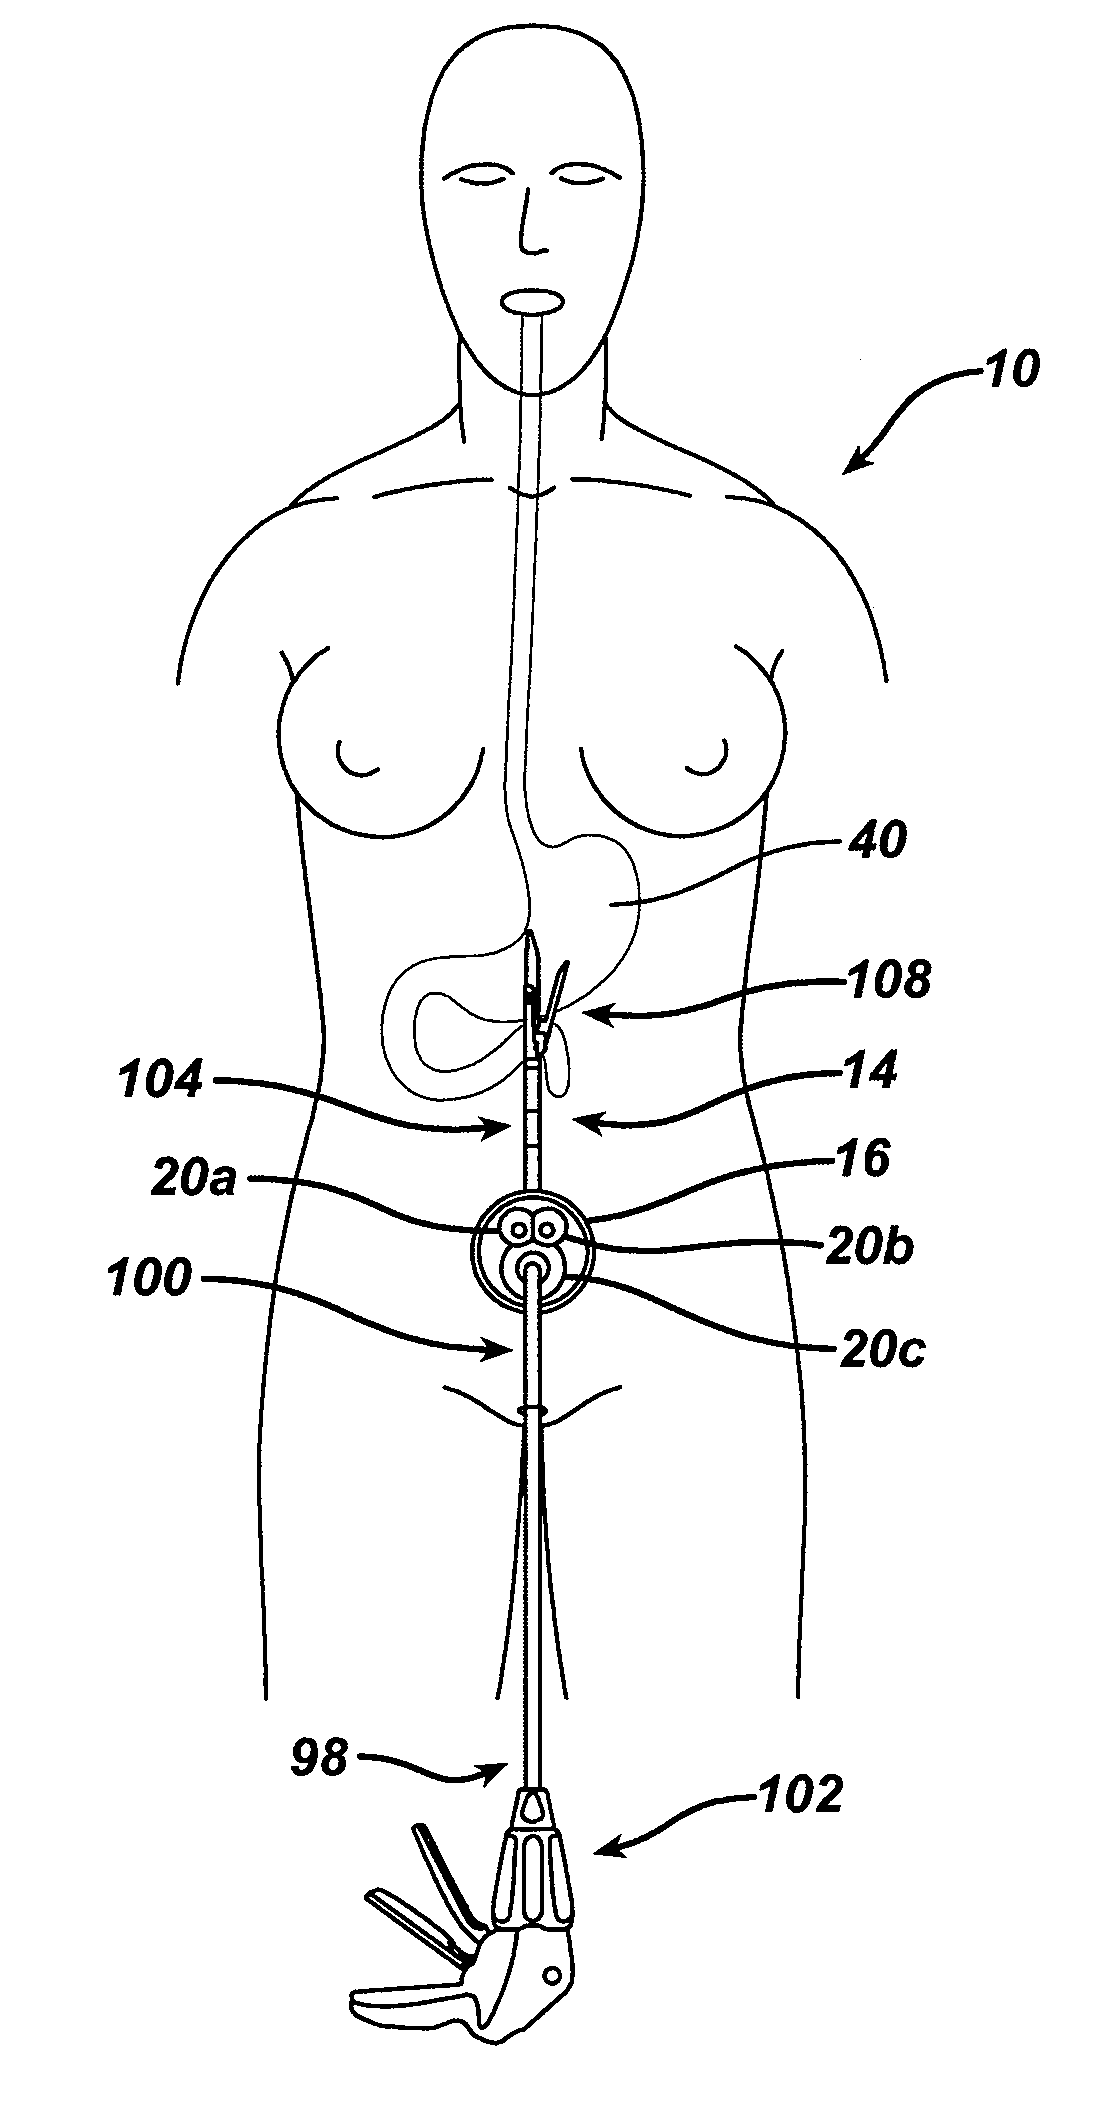 Methods and devices for performing gastroplasties using a multiple port access device